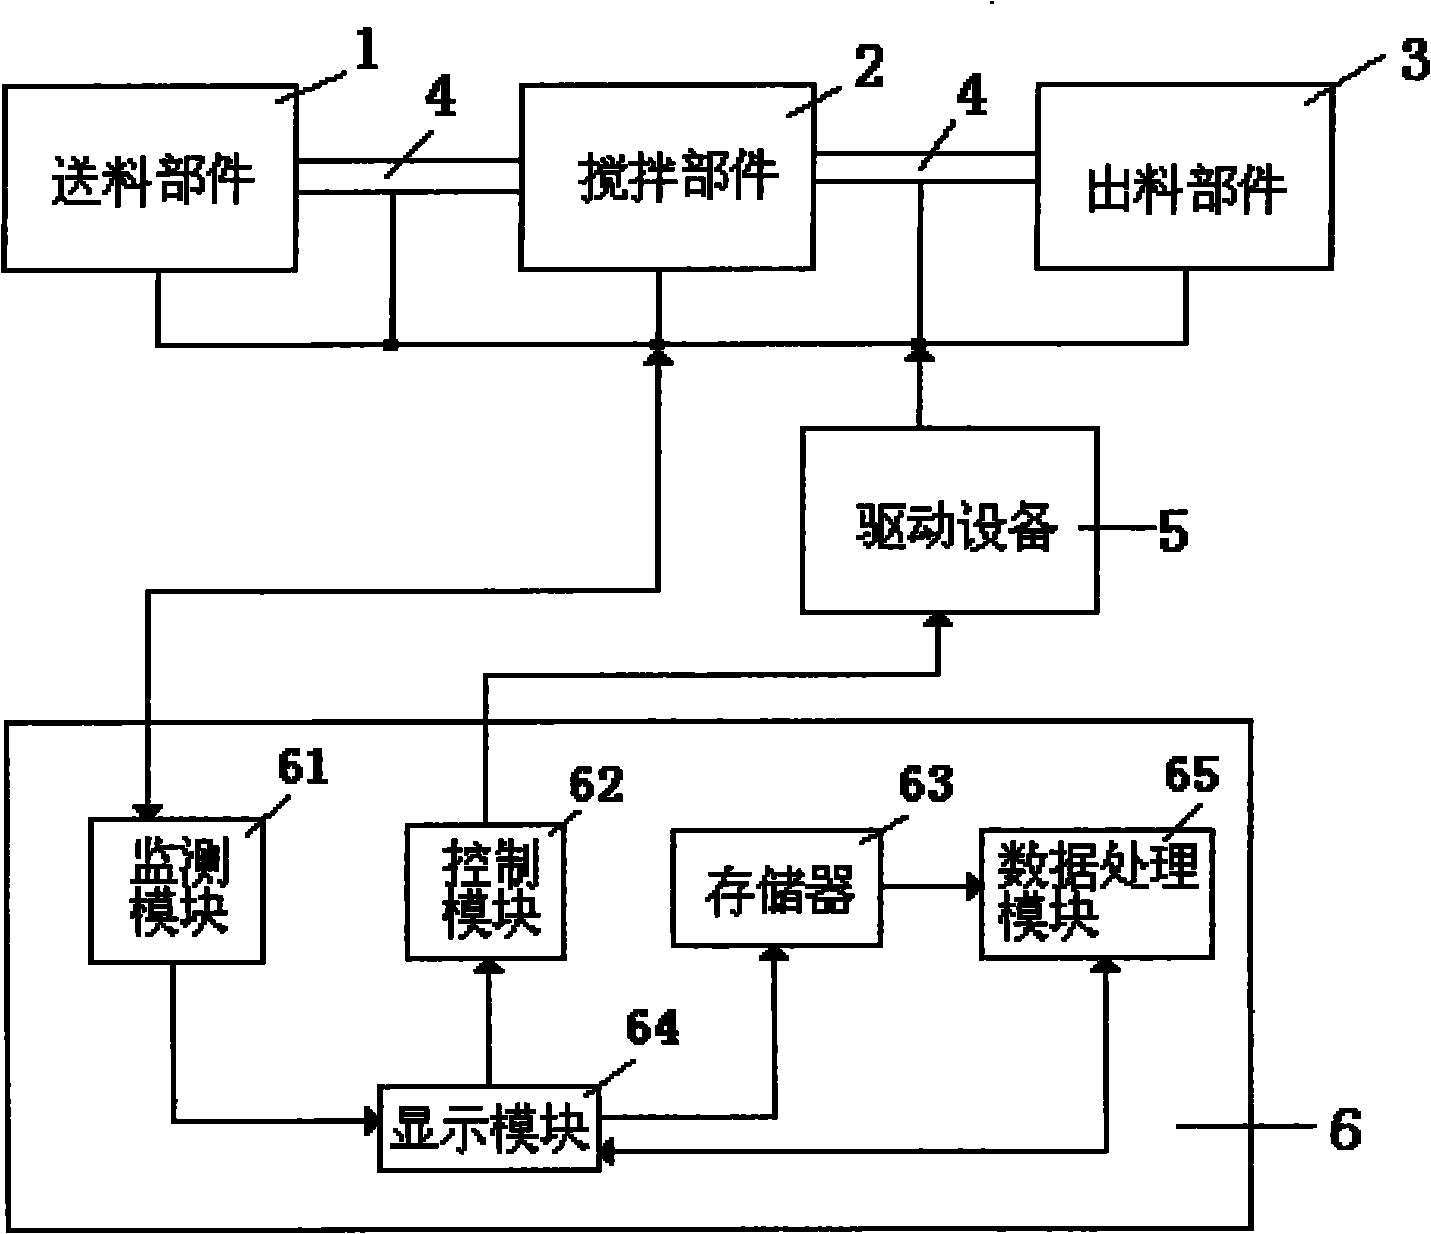 Control system of grain filler device